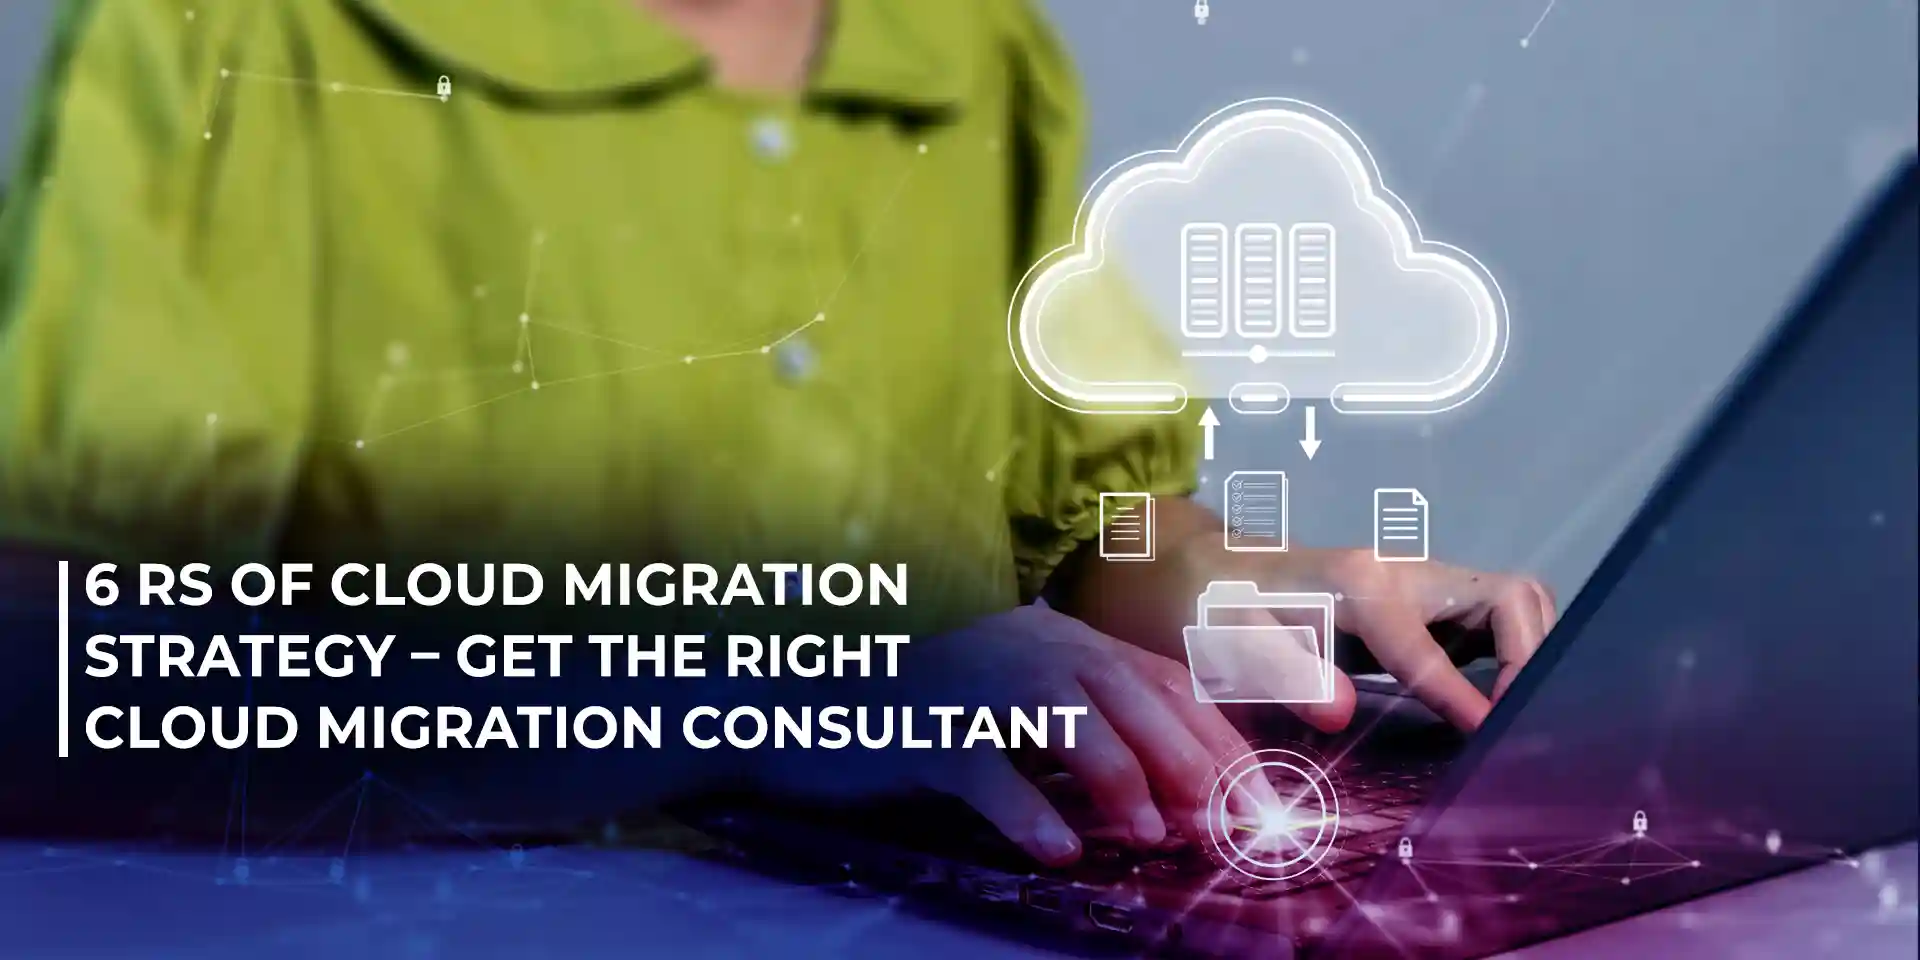 6 Rs of Cloud Migration Strategy – Get the right Cloud Migration Consultant